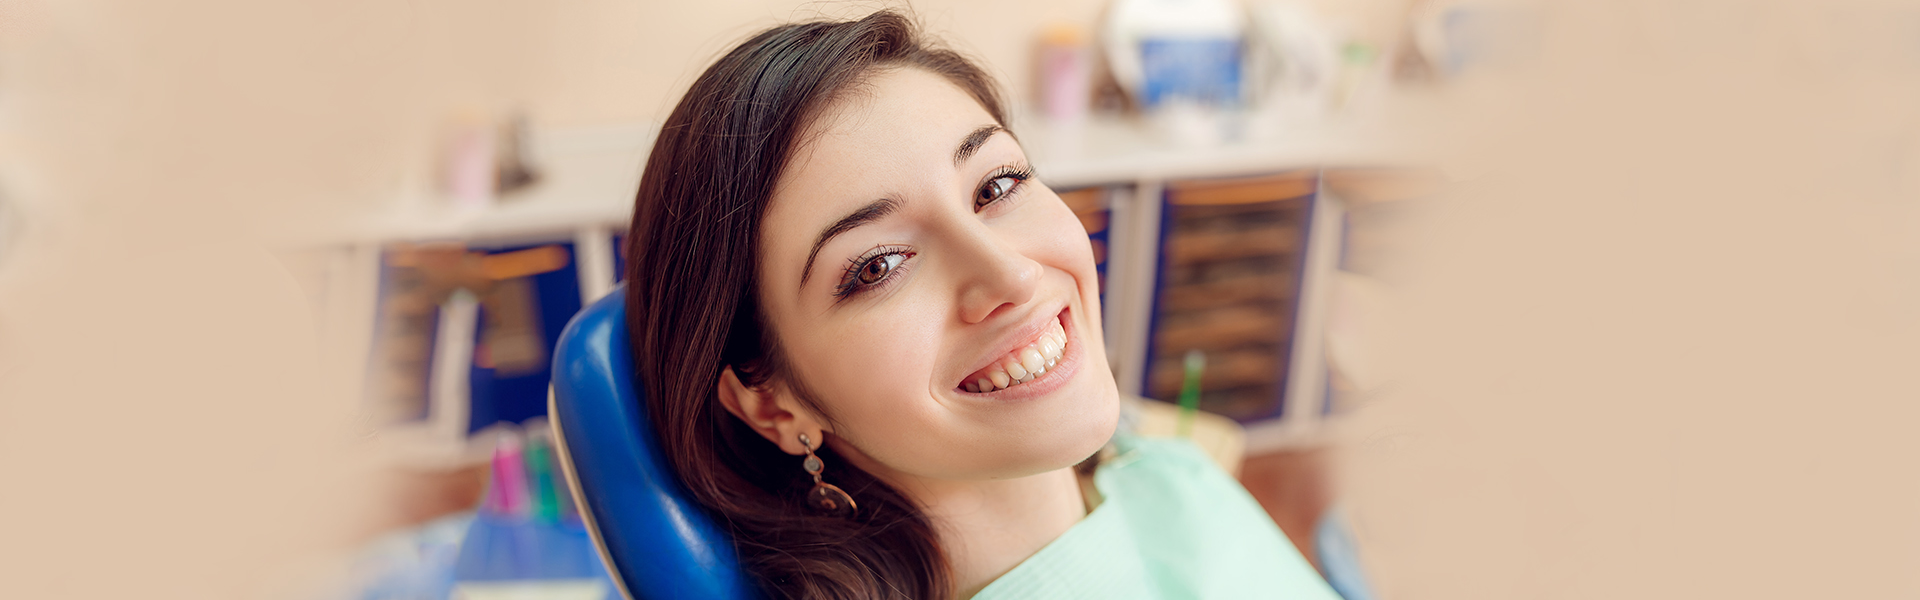 When Are Dental Onlays or Inlays Recommended?